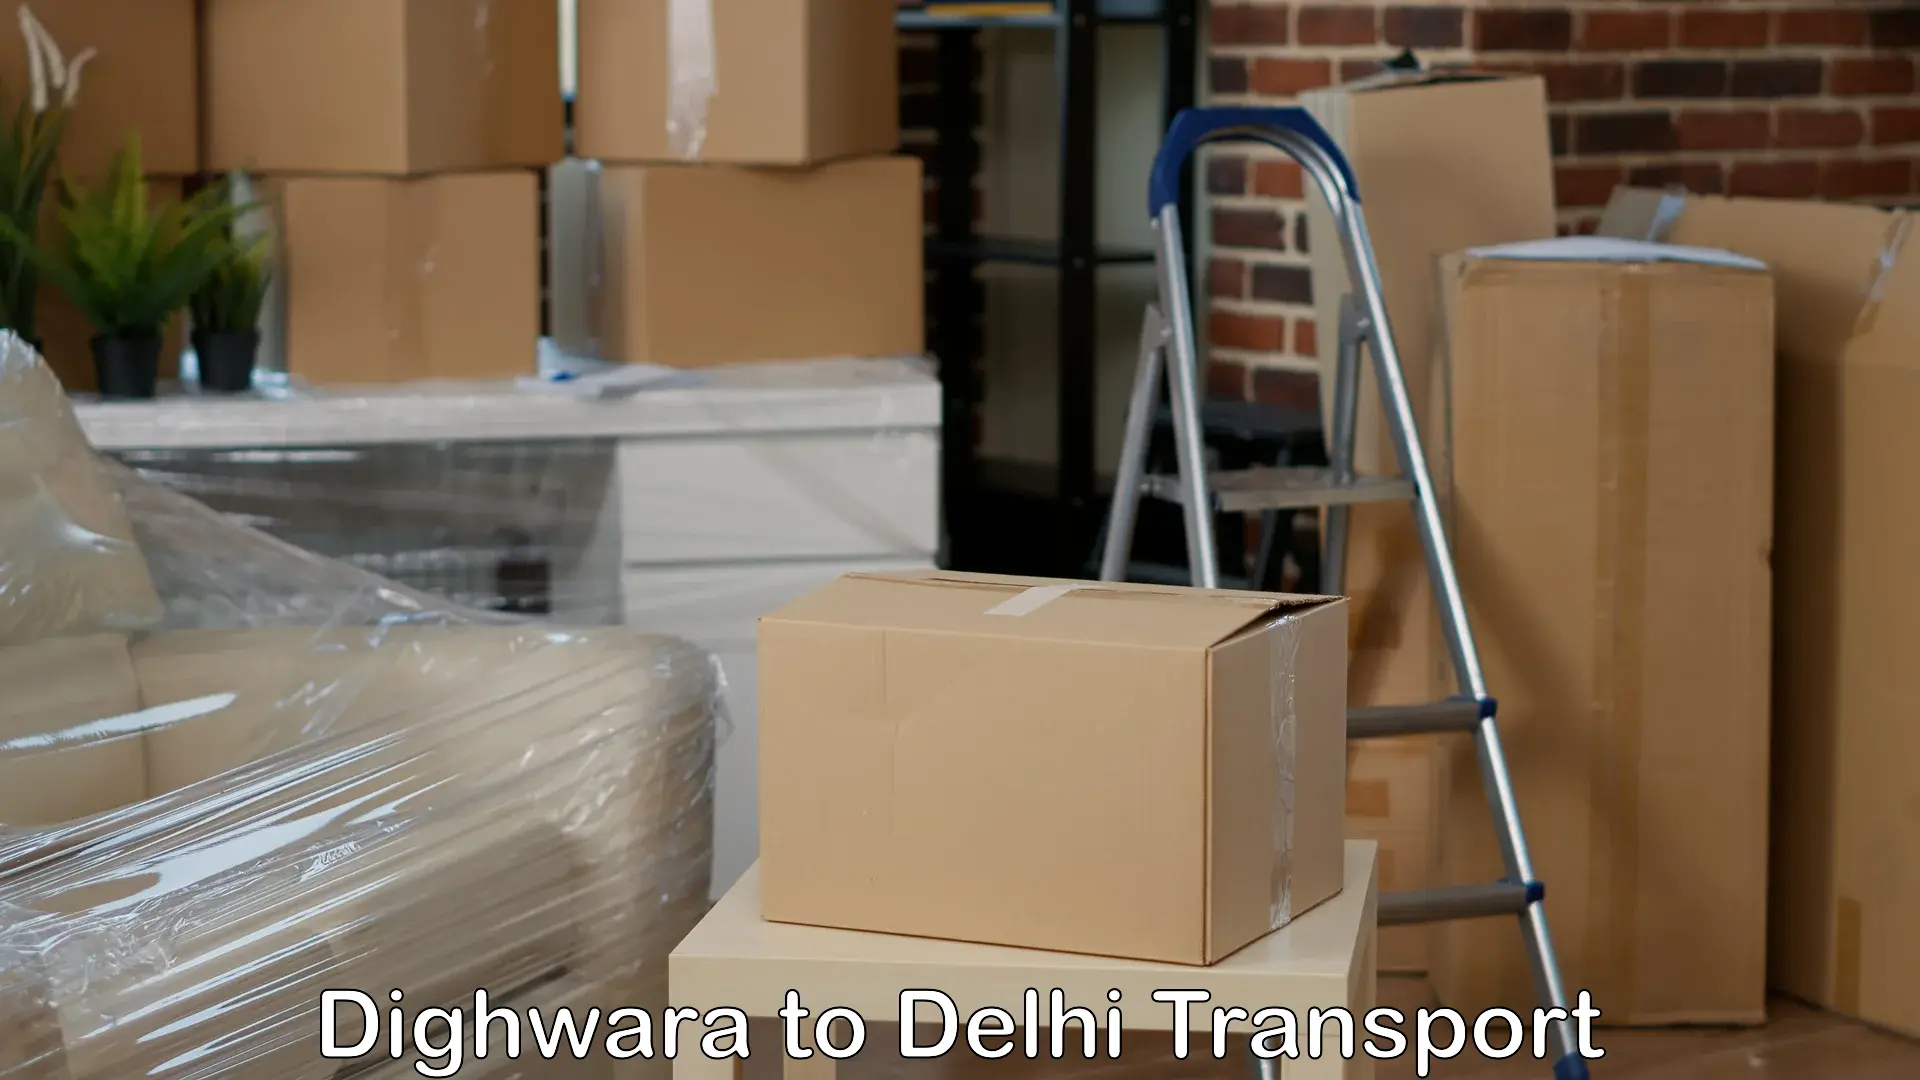 Transport bike from one state to another Dighwara to Ashok Vihar